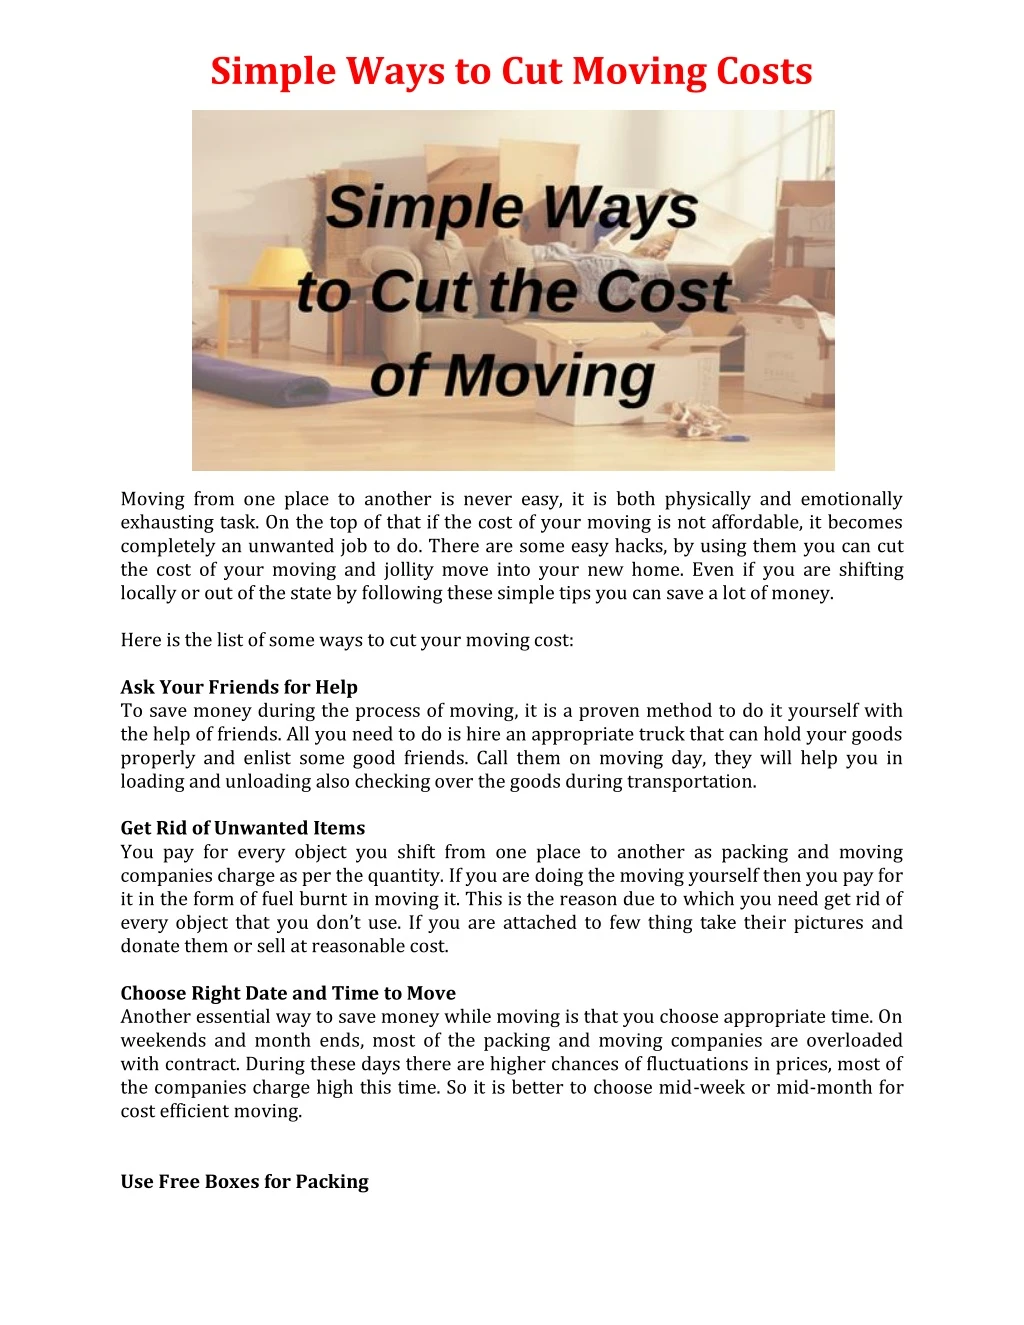 simple ways to cut moving costs